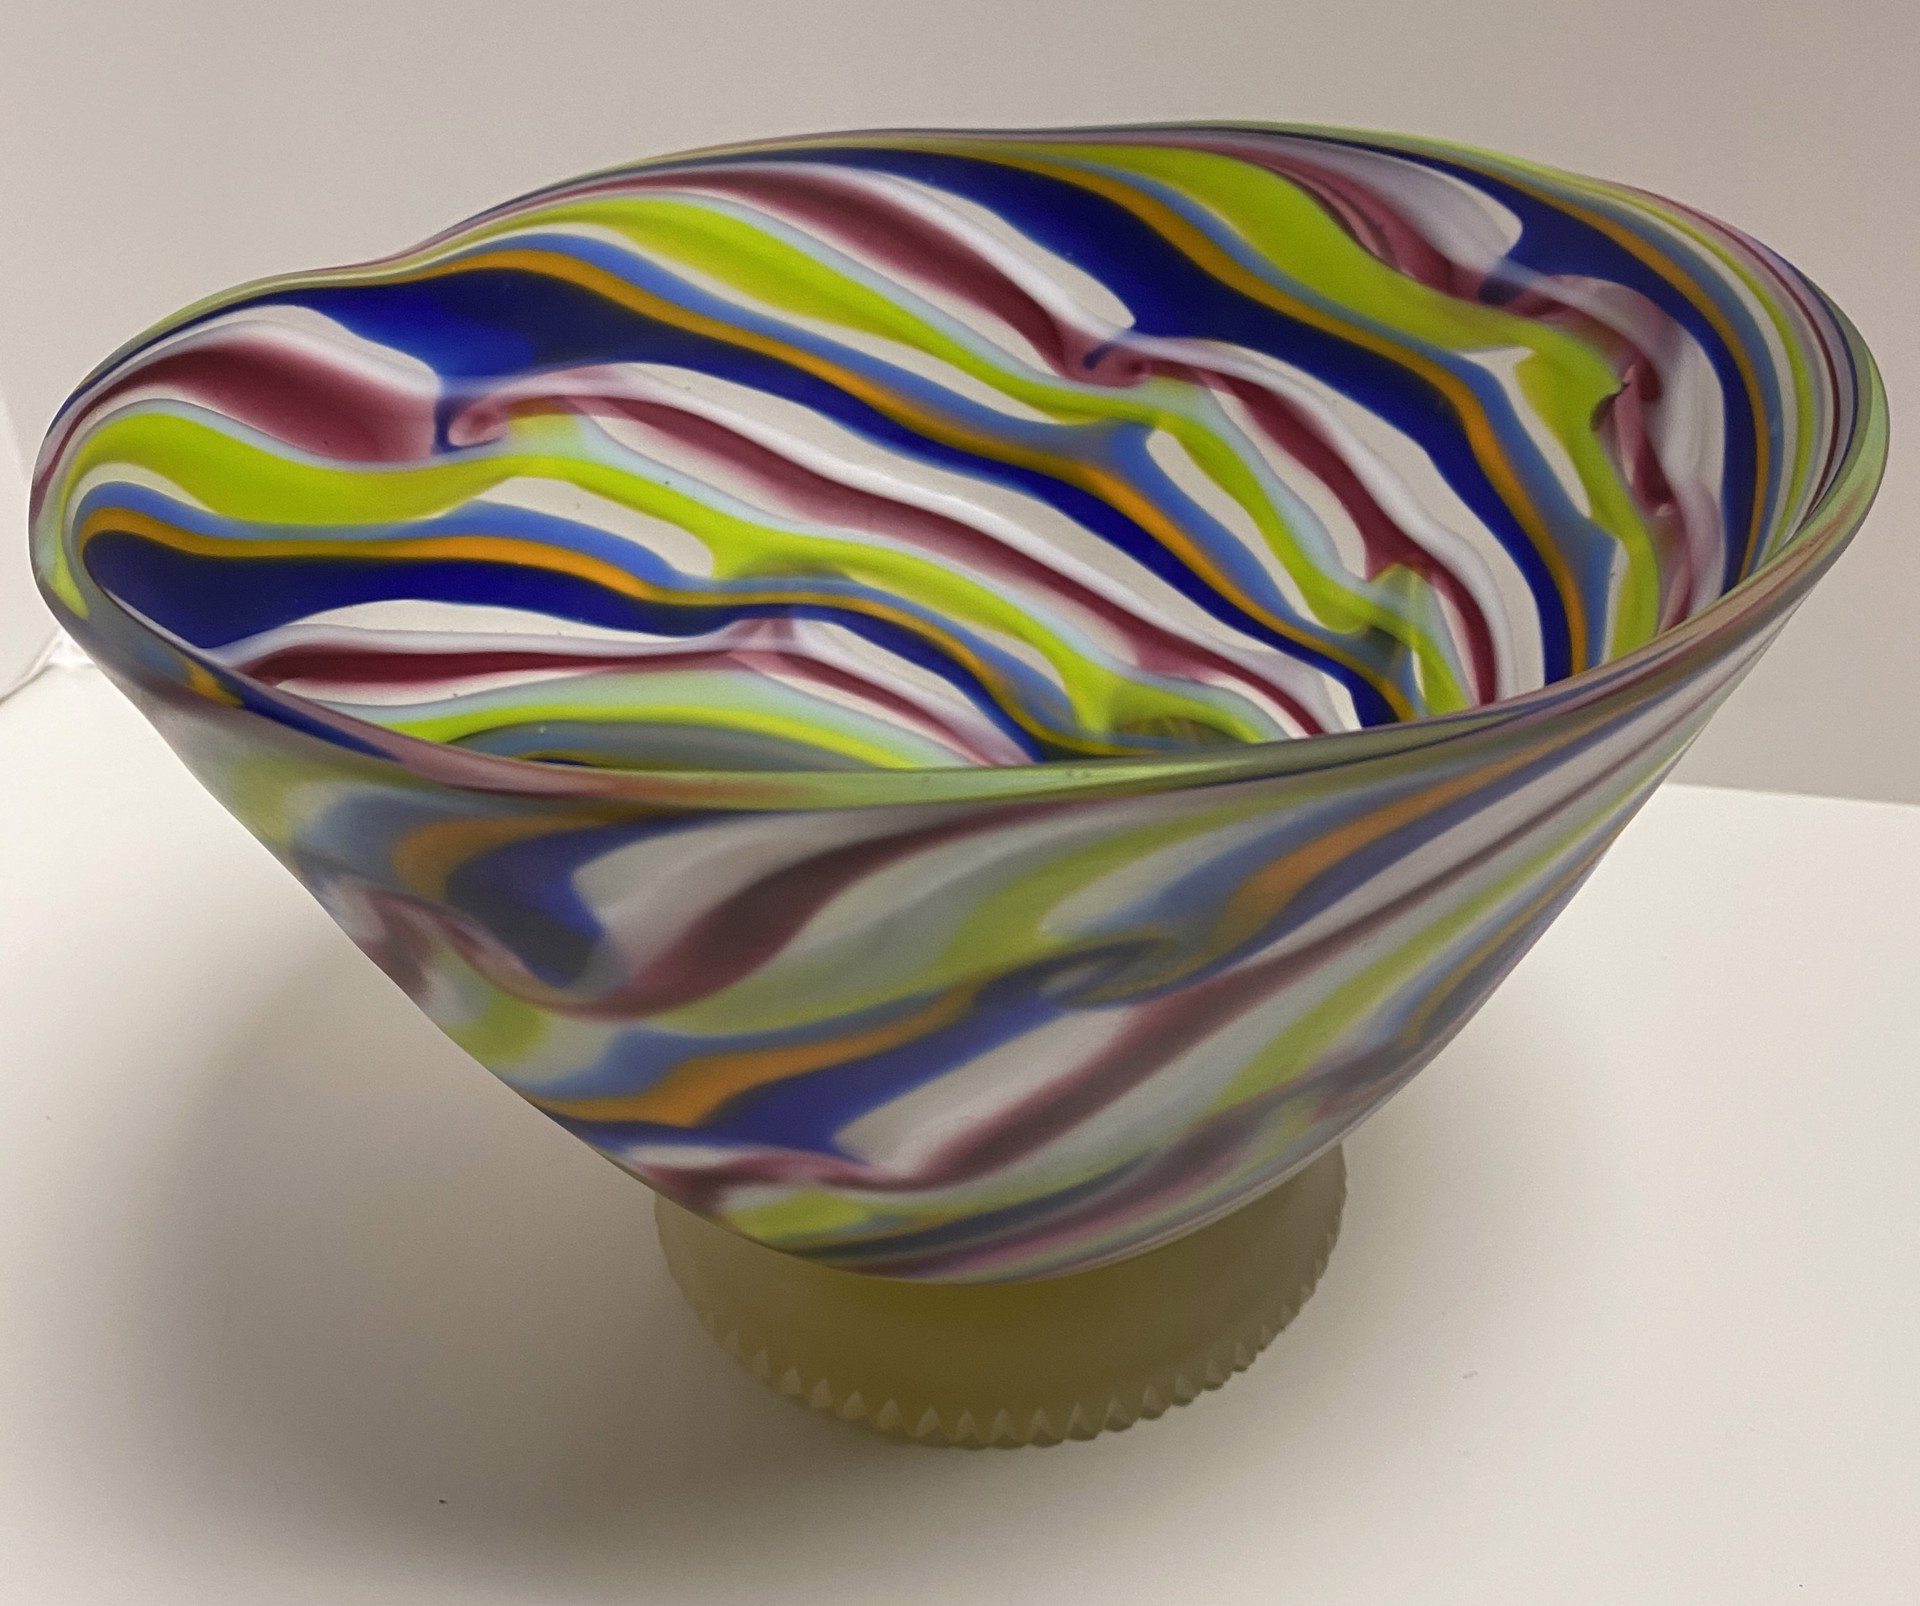 Smoke Multi-color Footed Bowl by Rene Culler